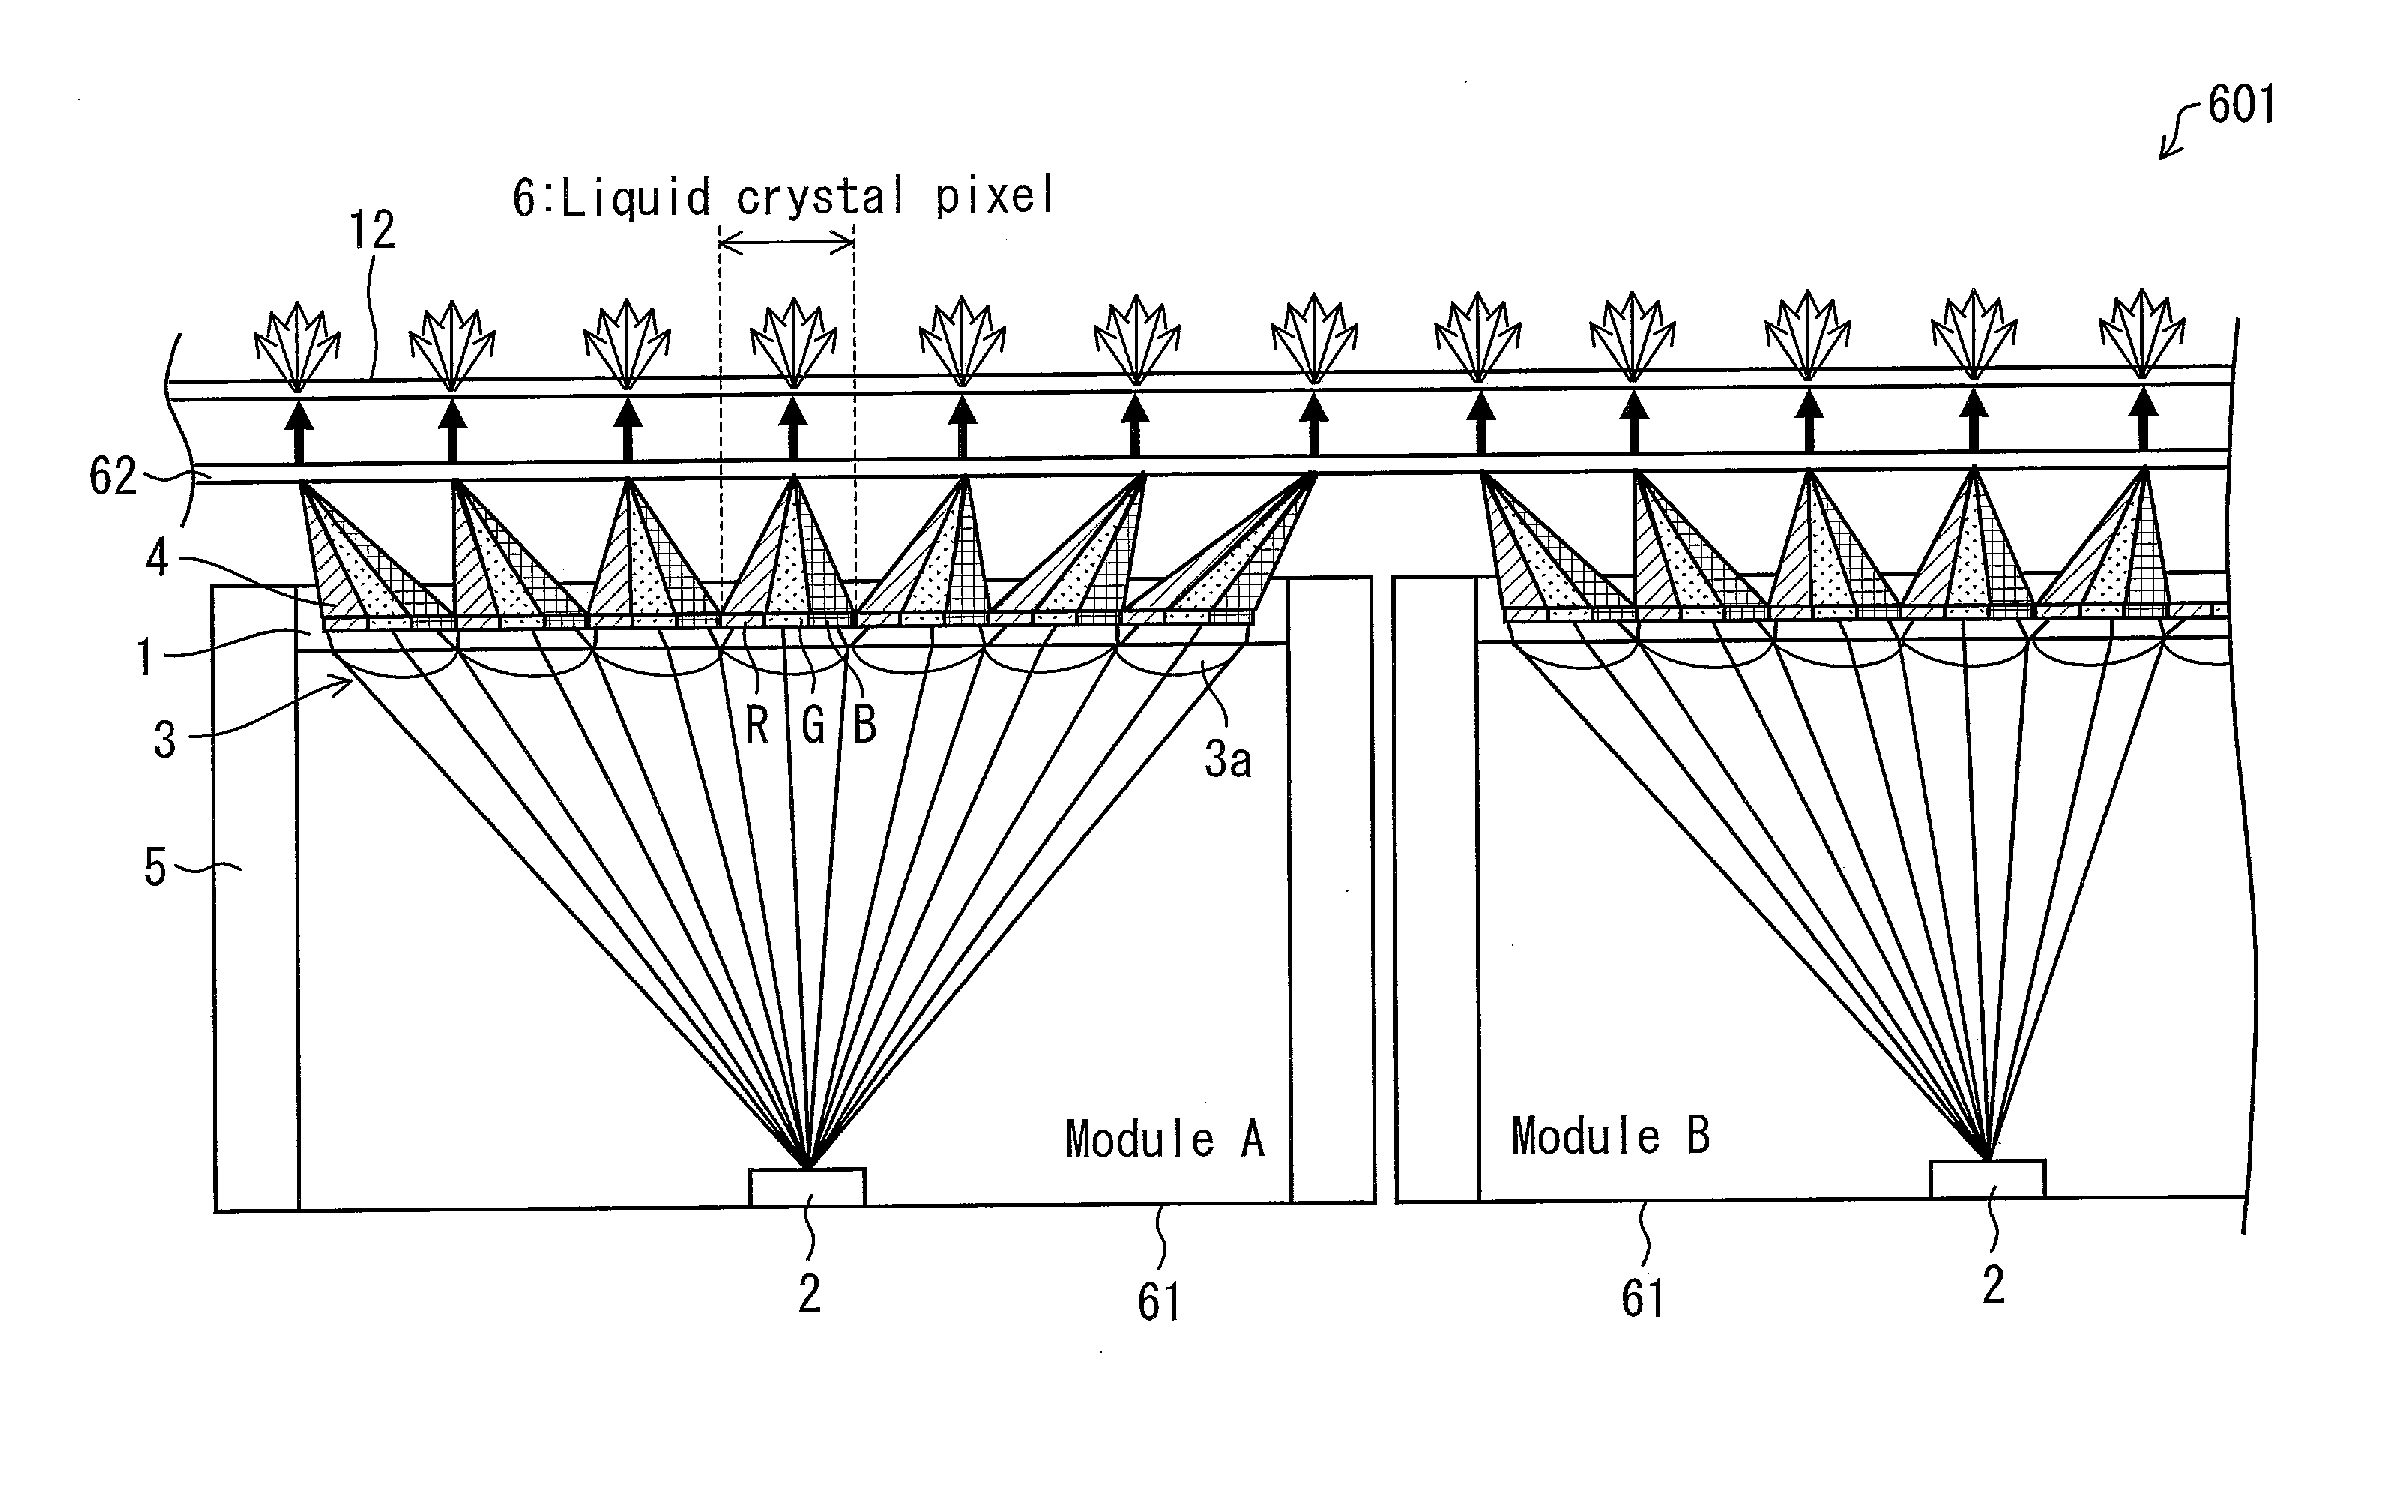 Multi-display device and display modules